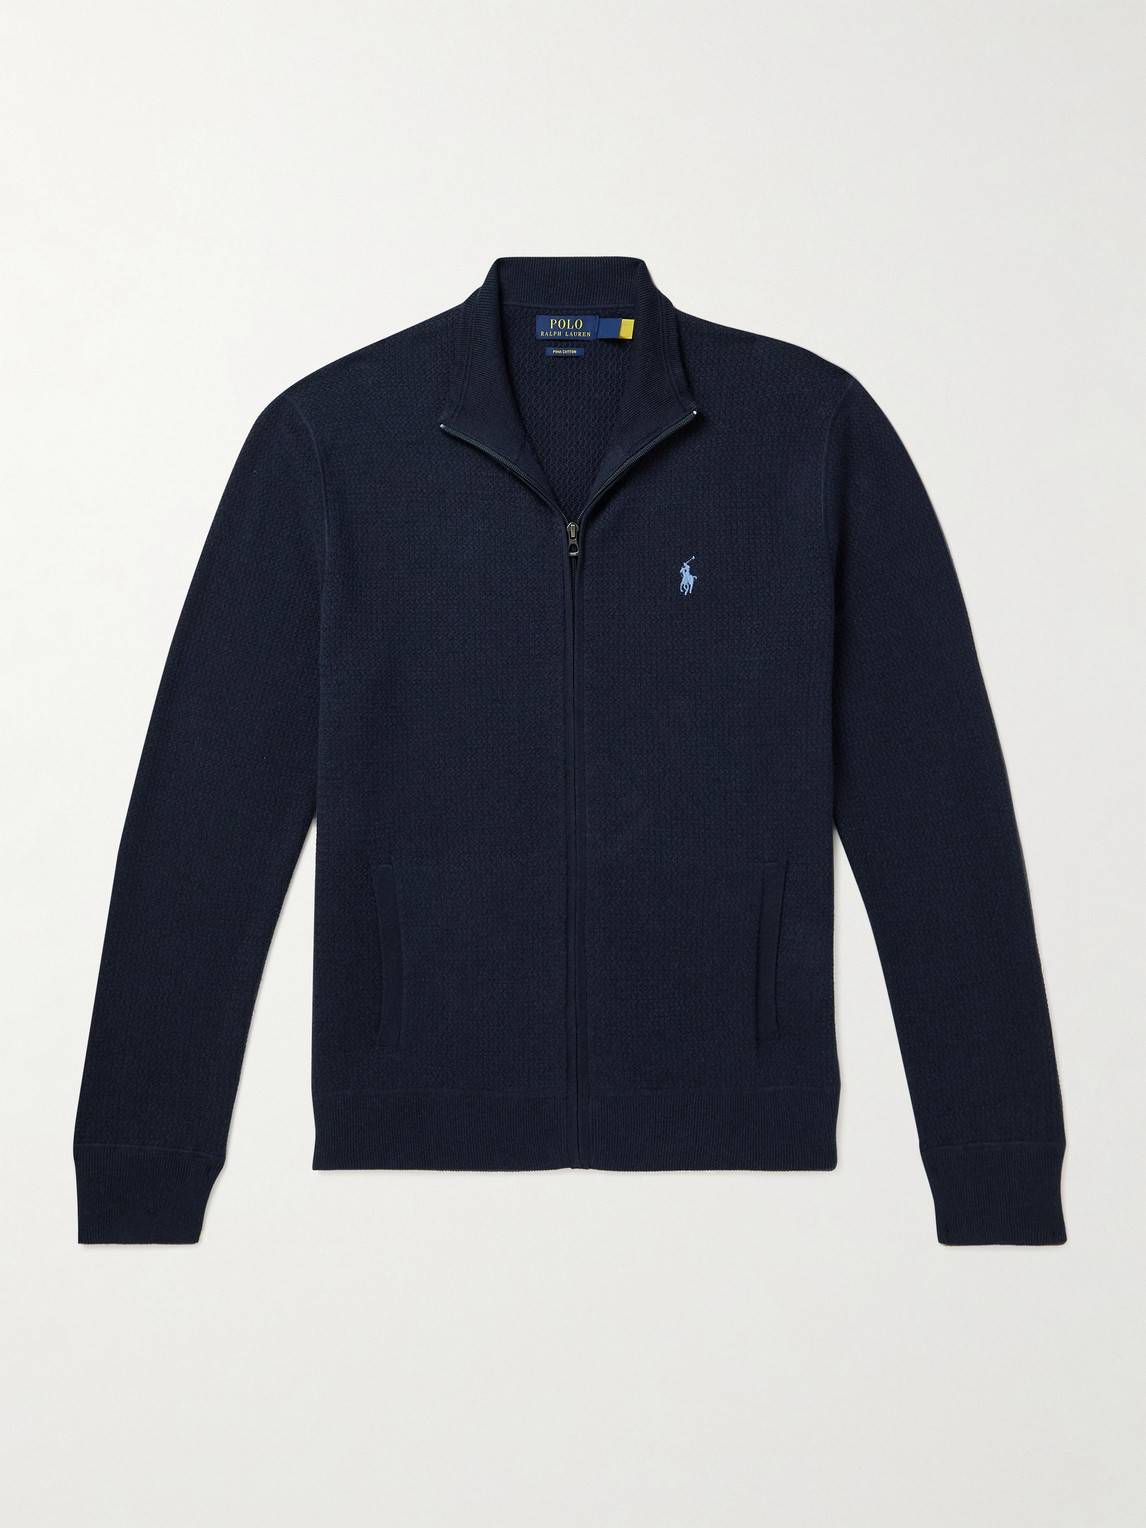 POLO RALPH LAUREN LOGO-EMBROIDERED WAFFLE-KNIT COTTON ZIP-UP CARDIGAN